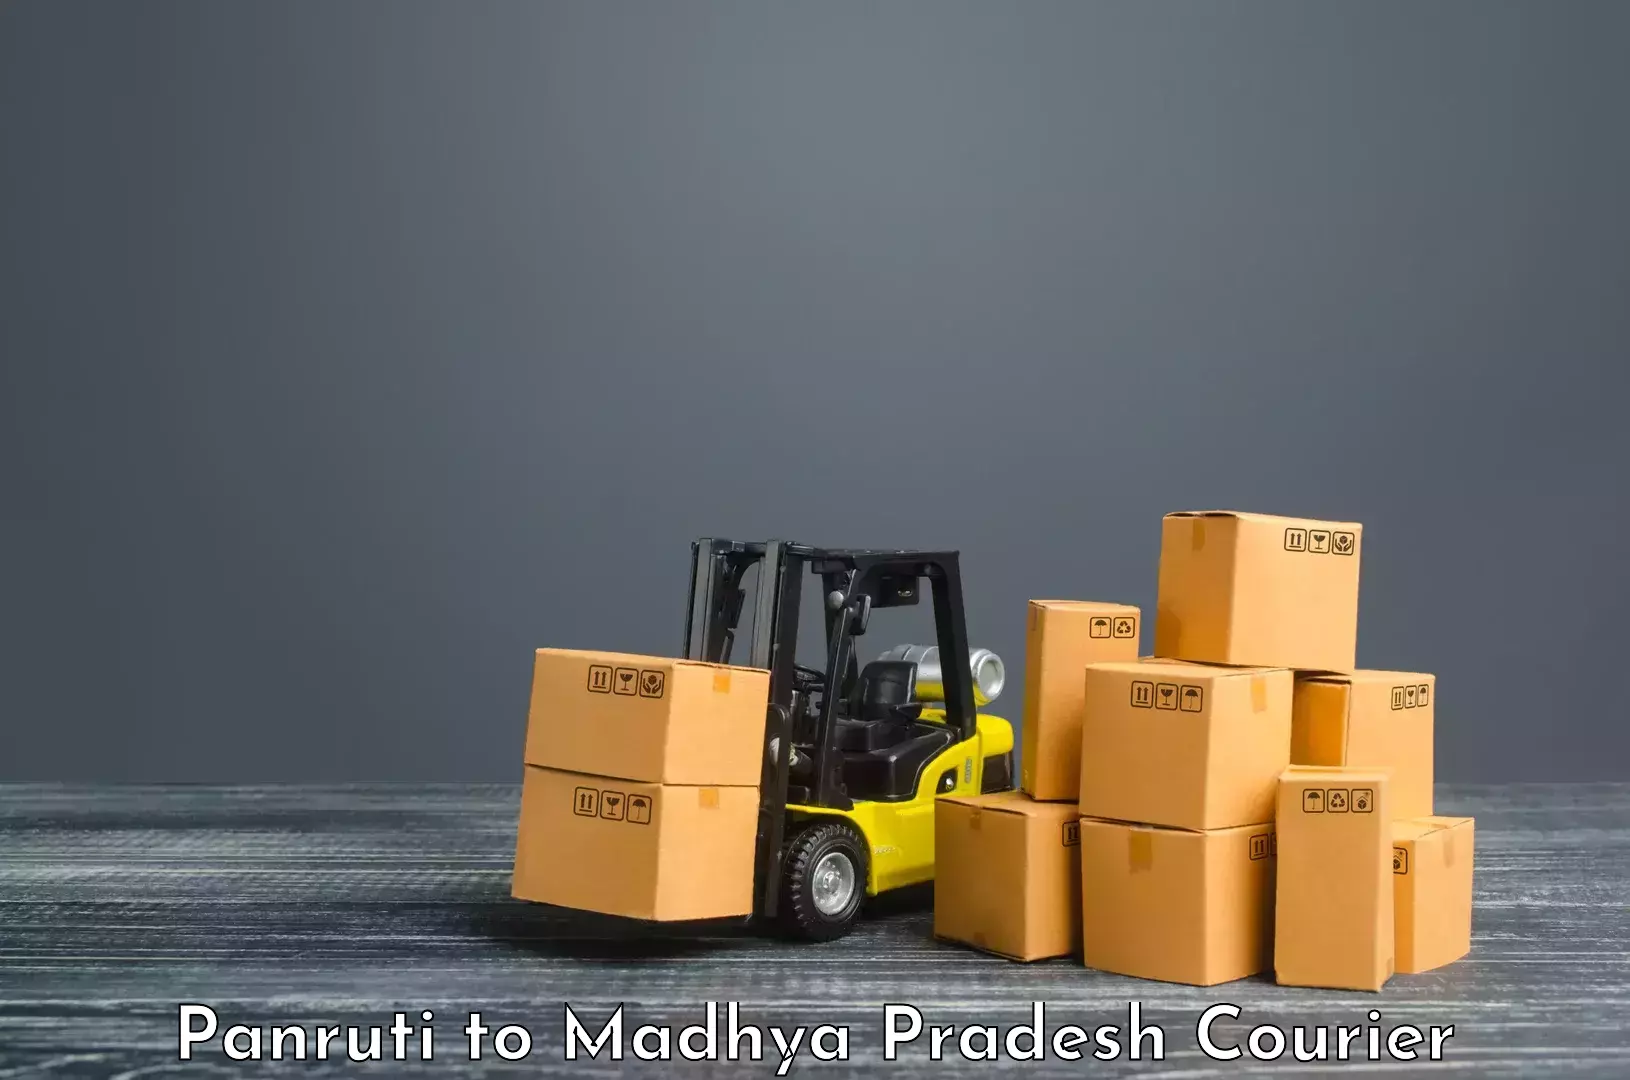 Quality courier services Panruti to Indore